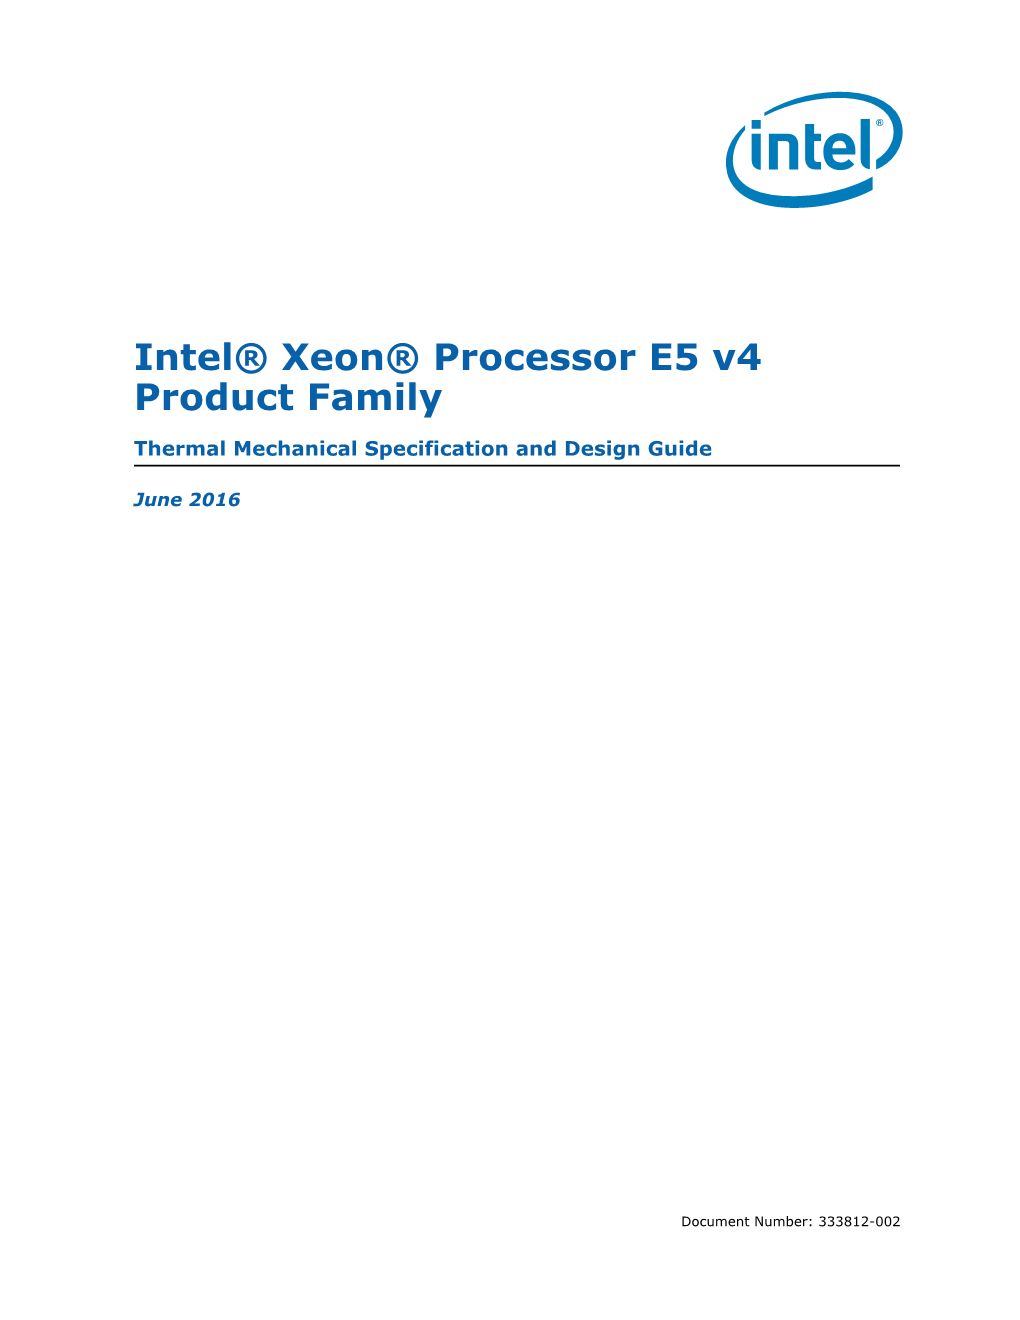 Thermal Guide: Intel® Xeon® Processor E5 V4 Product Family